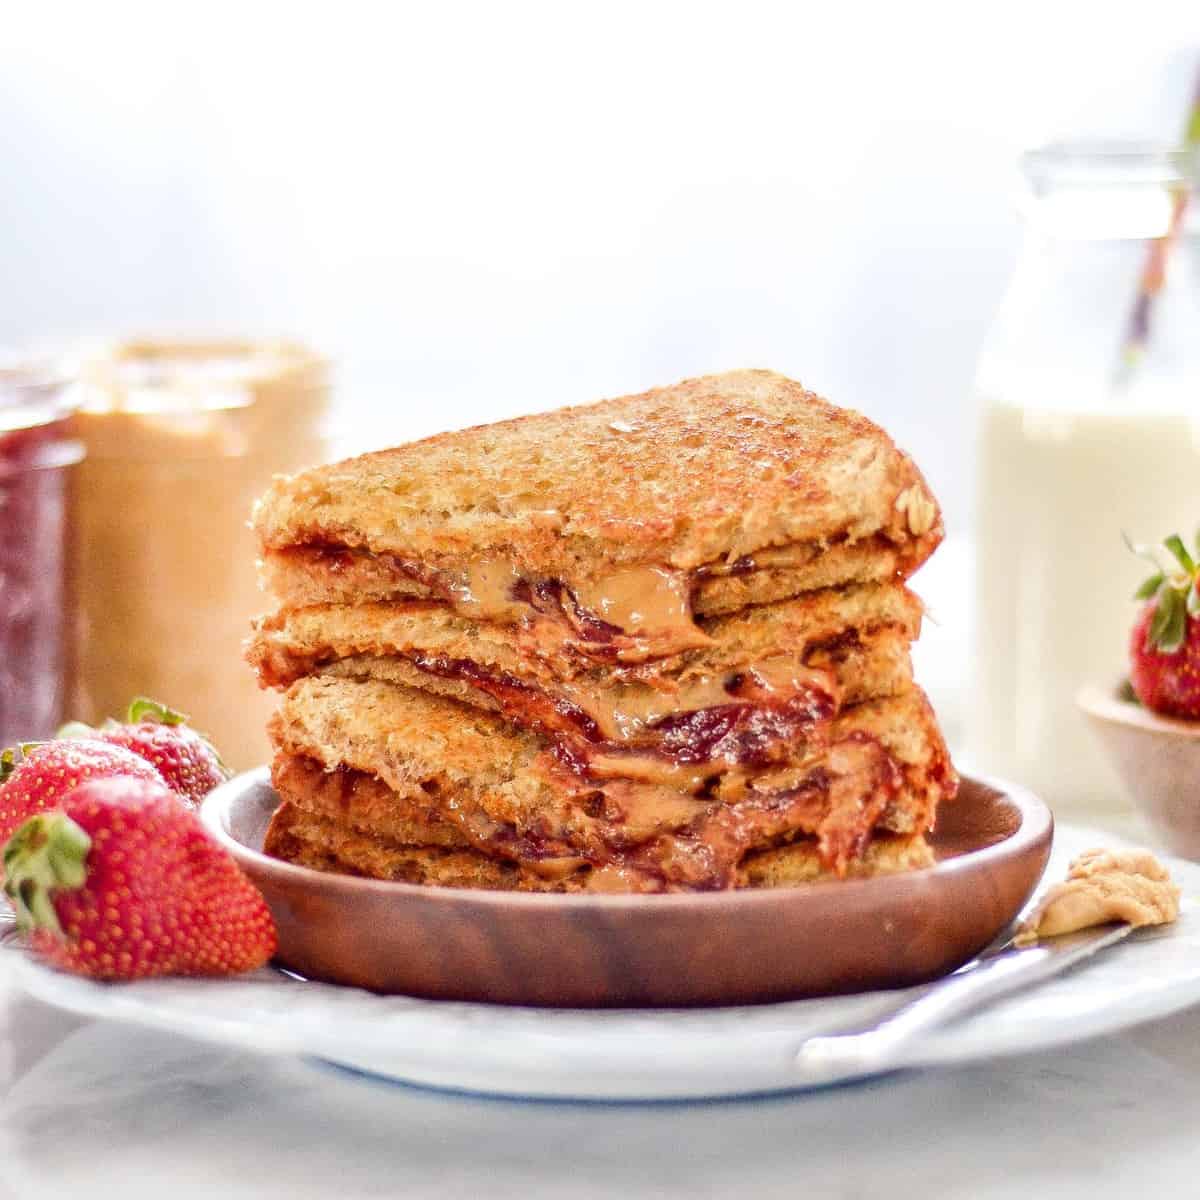 A stack of strawberry and peanut butter grilled cheese on a plate.